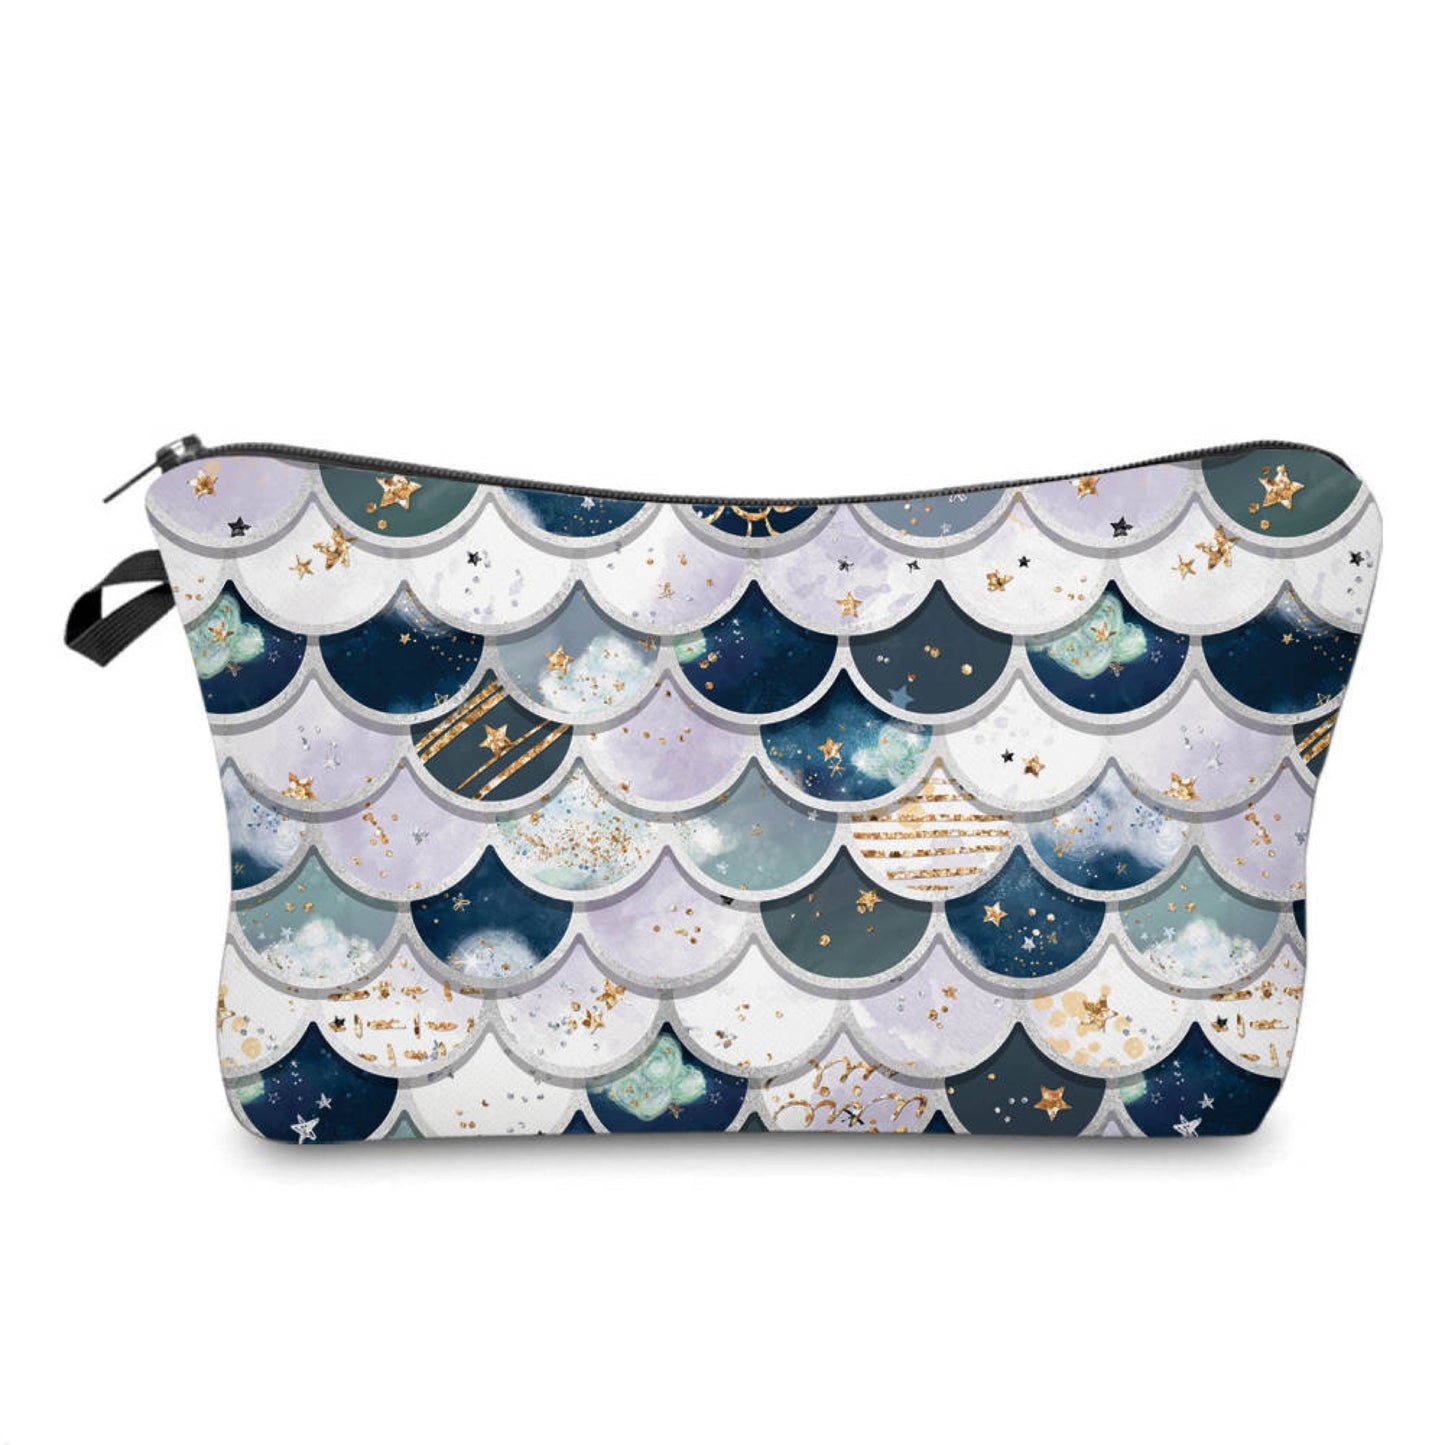 Sky Mermaid Scales - Water-Resistant Multi-Use Pouch